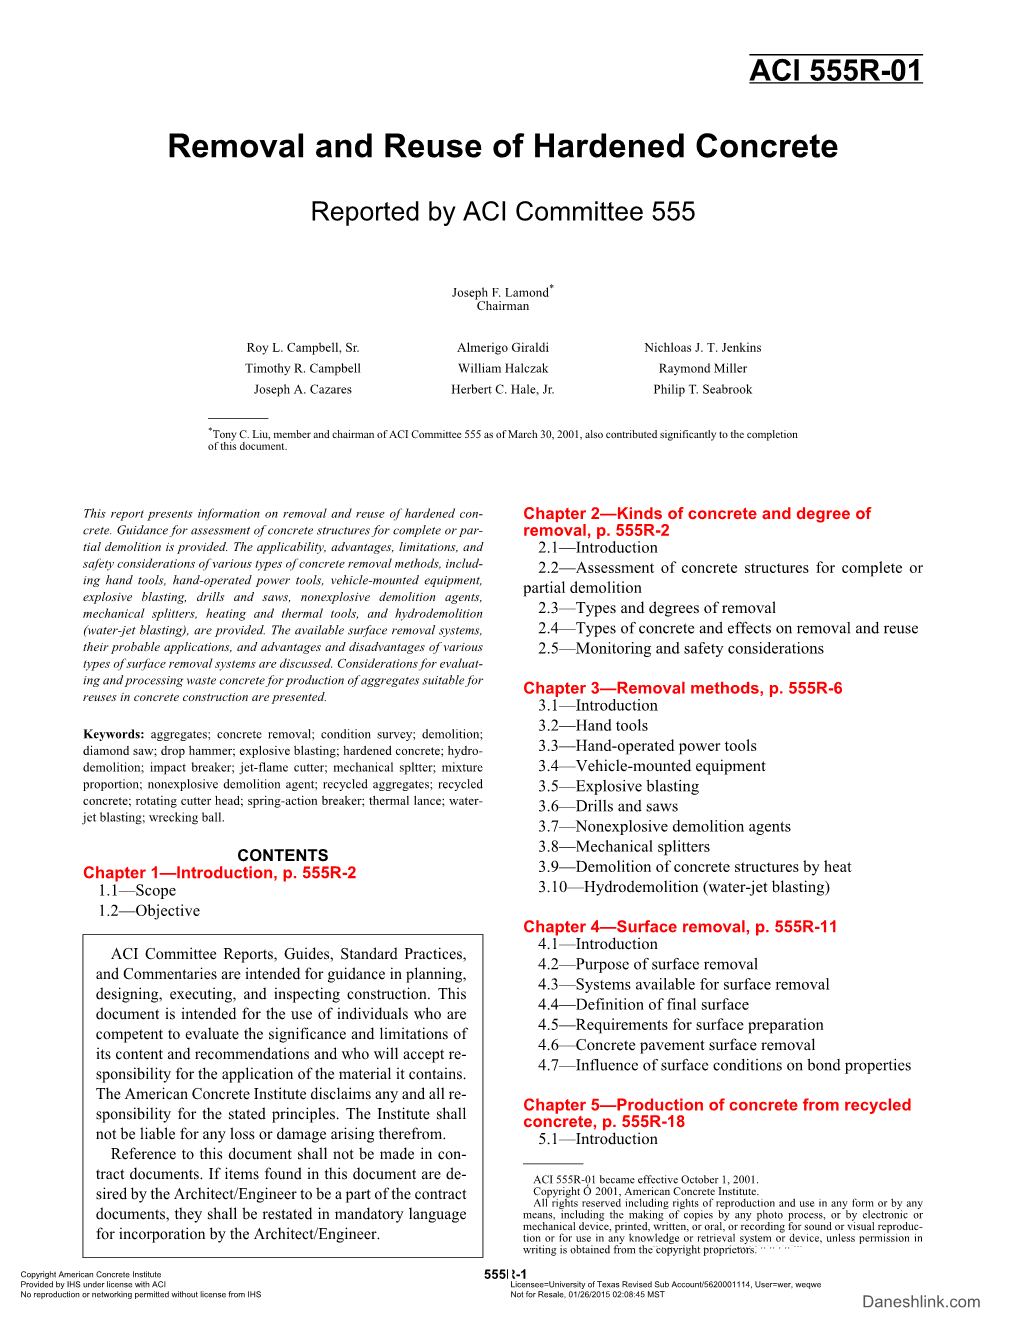 555R-01 Removal and Reuse of Hardened Concrete